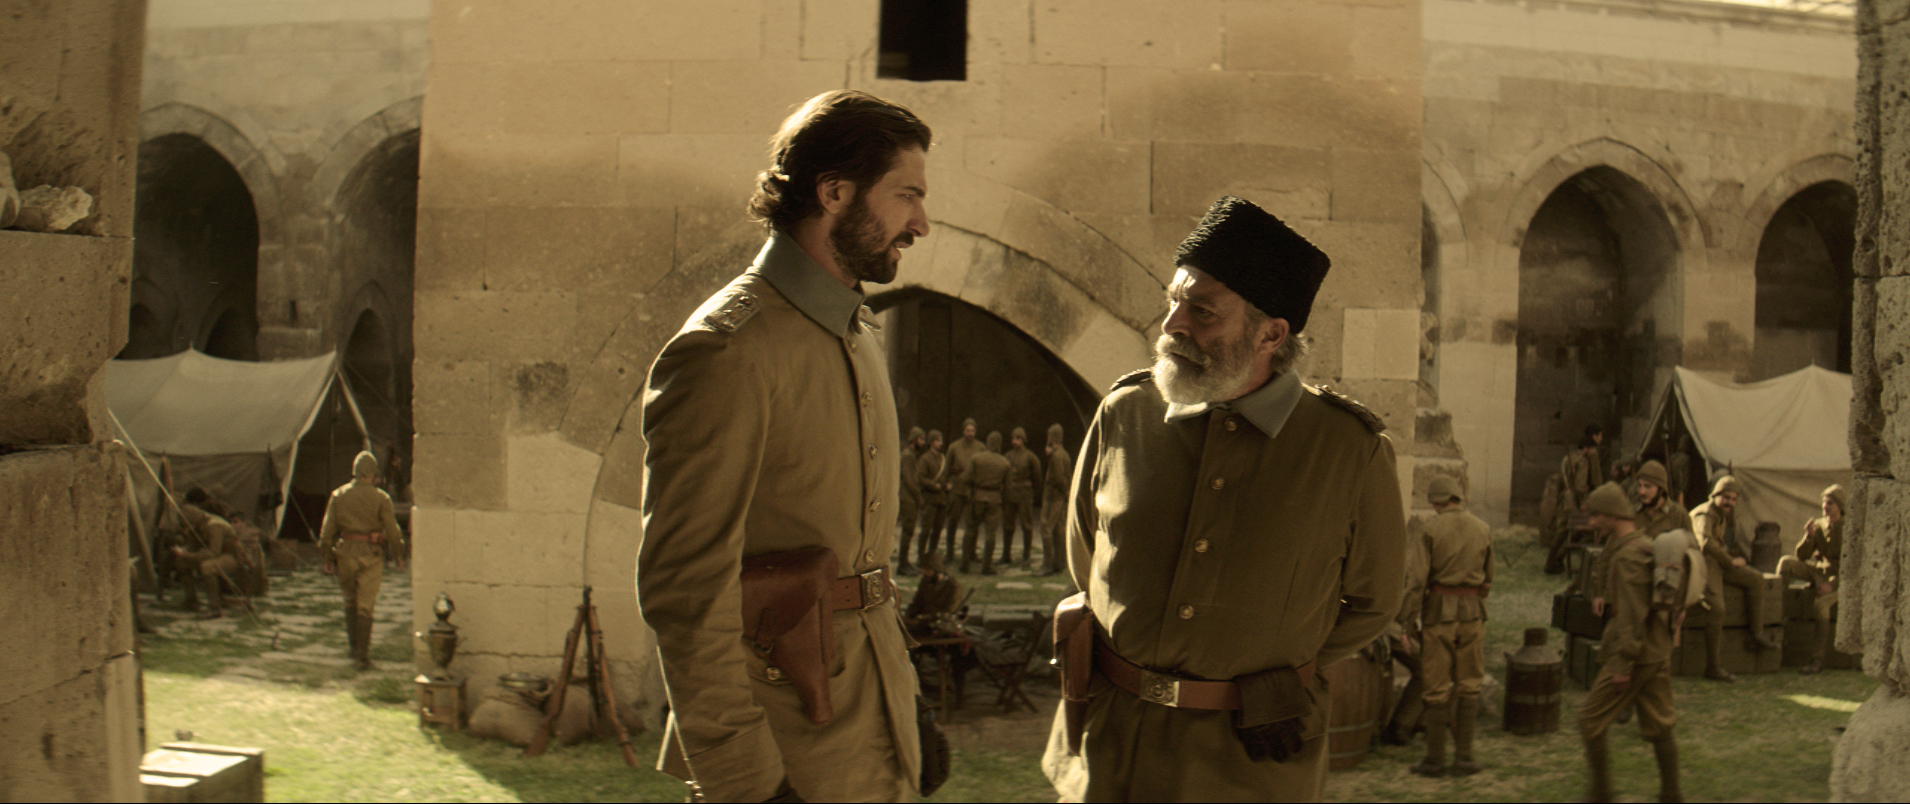 THE OTTOMAN LIEUTENANT - Directed by Joseph Ruben - Production Design by Luca Tranchino - Ext. Ottoman Fortress - ©2016 - Y Stone